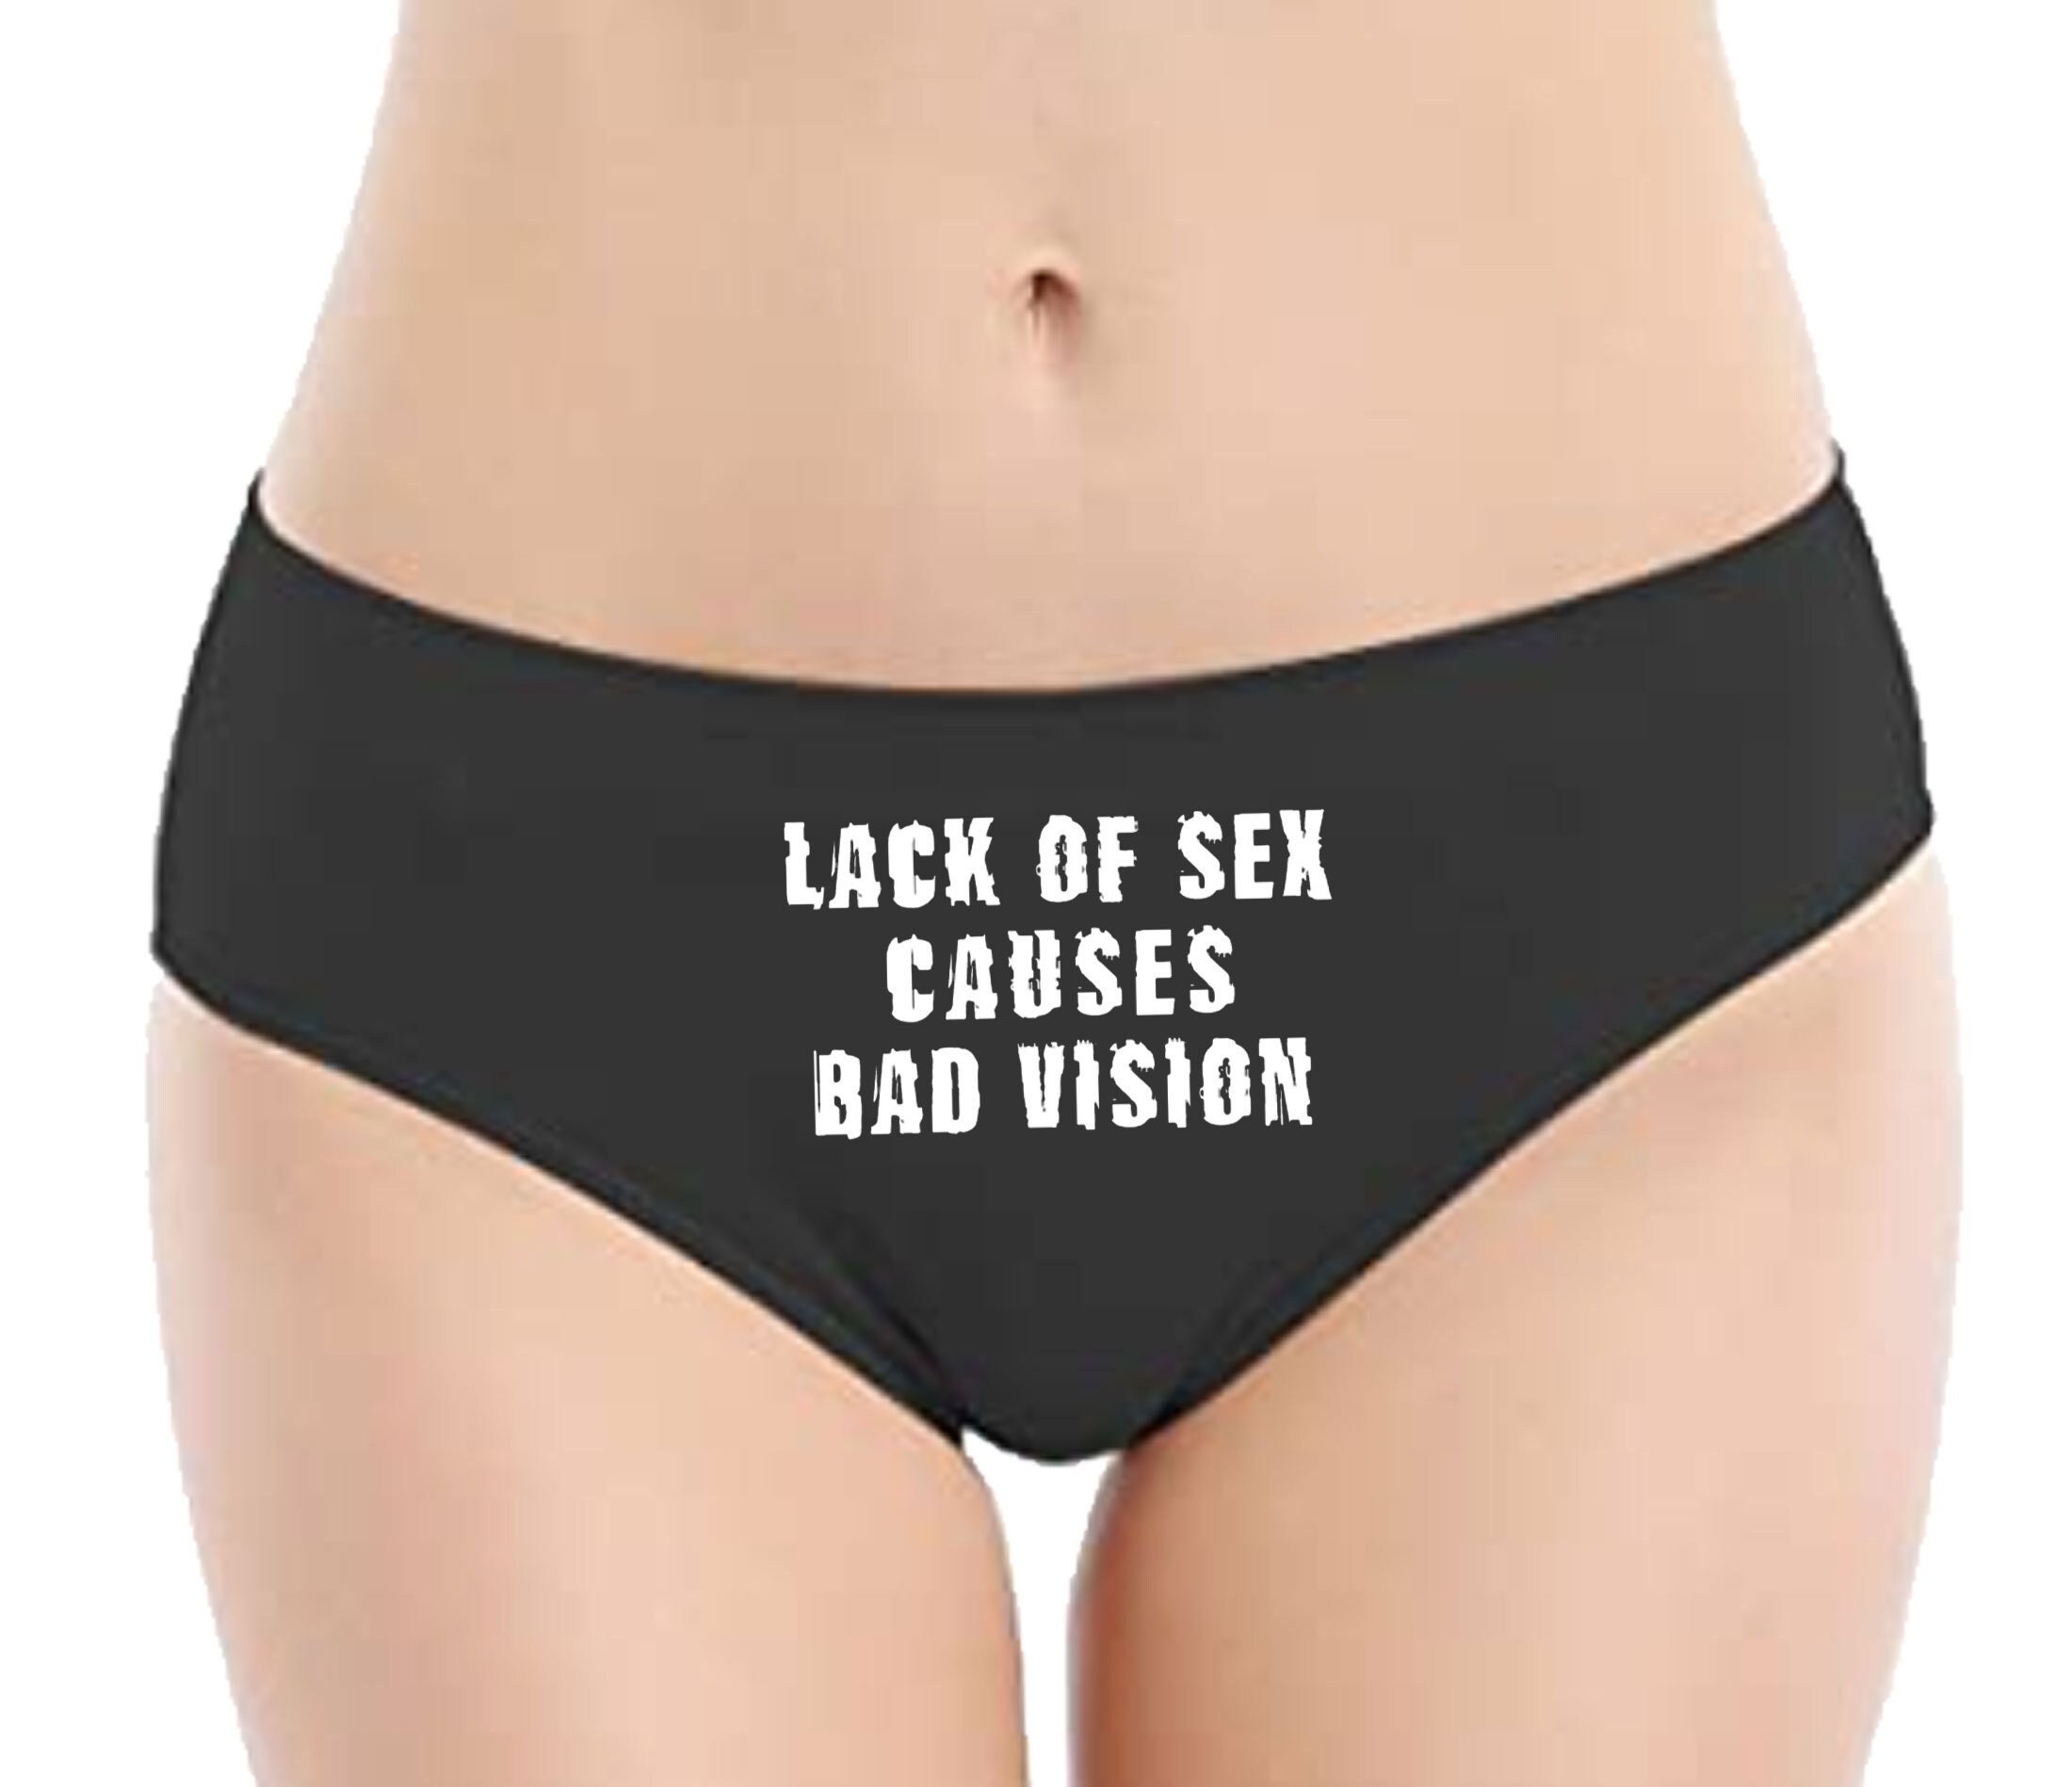 Naughty Panties Lack of Sex Causes Bad Vision Lingerie